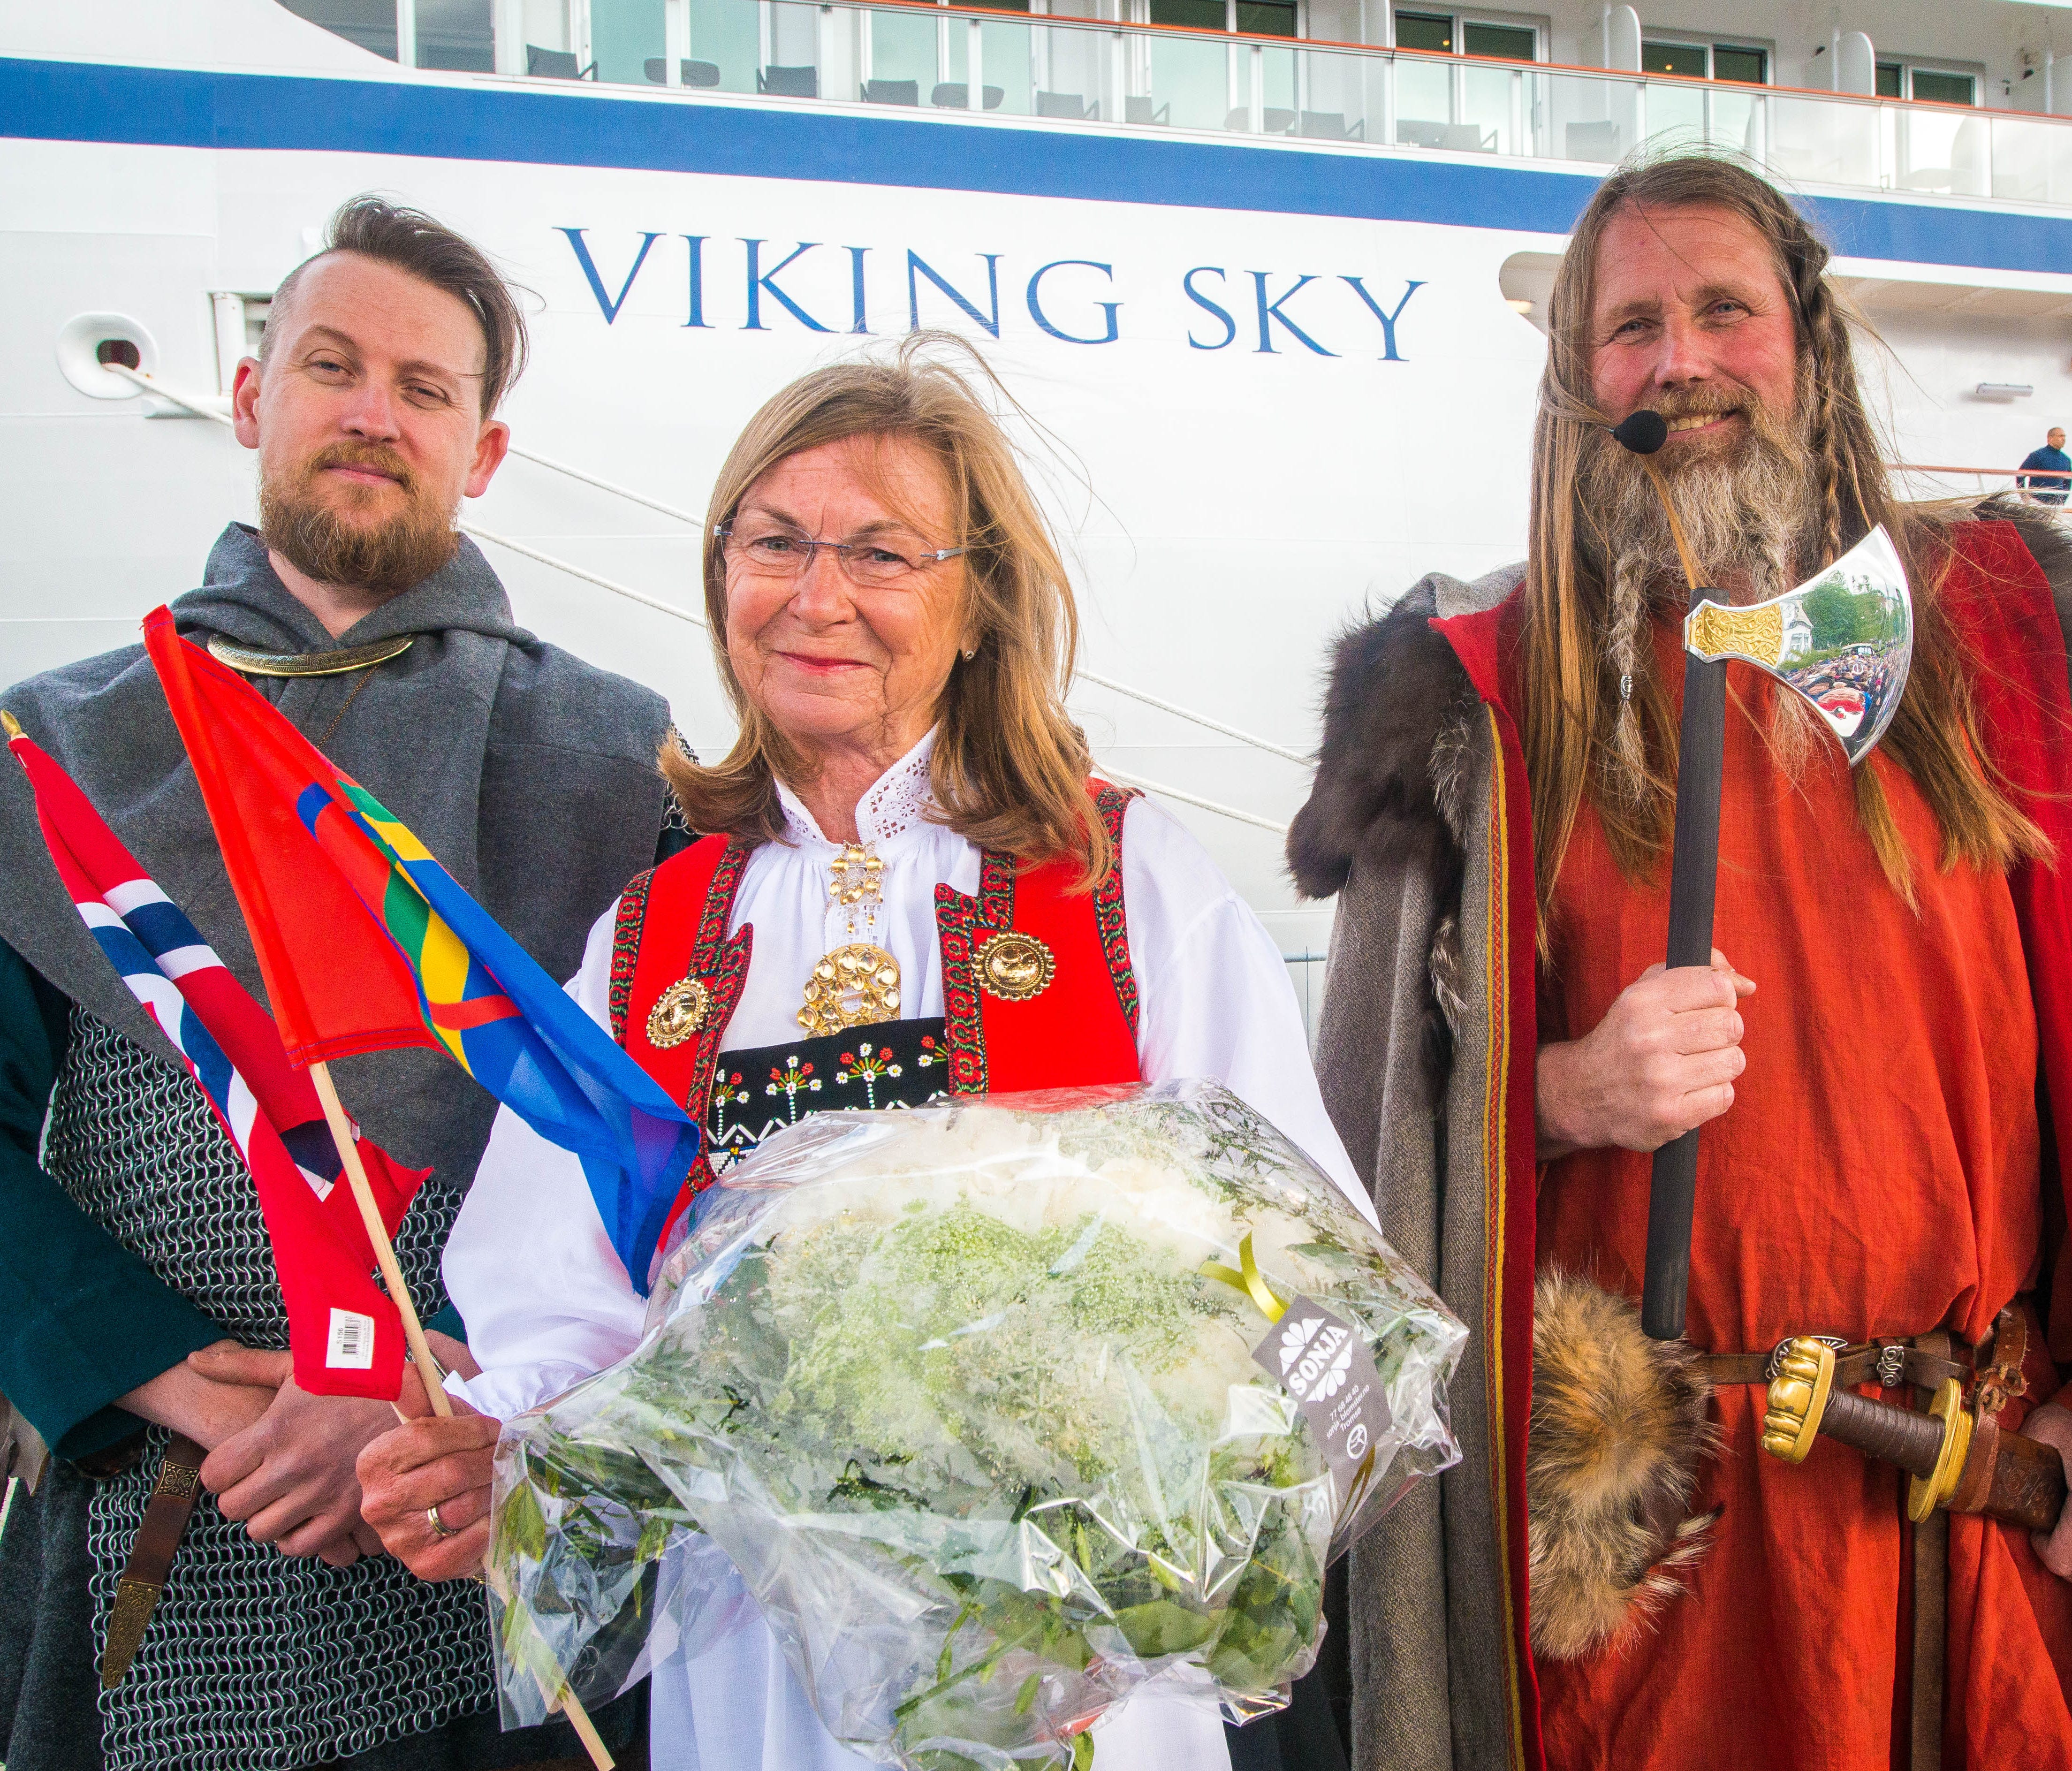 Viking Sky godmother Marit Barstad at the christening ceremony for the ship.